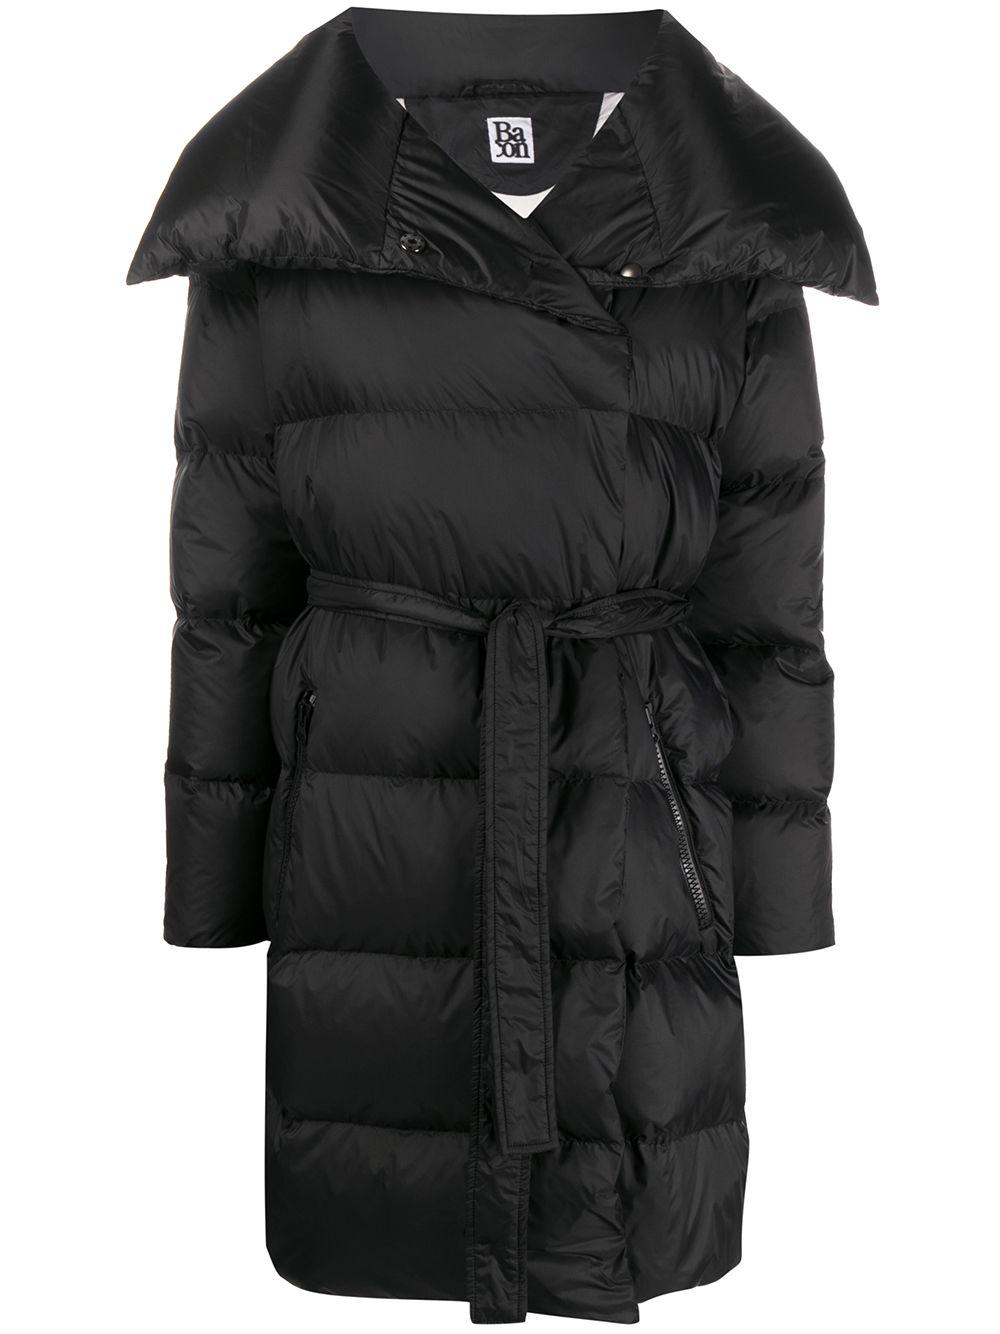 Puffa 90 Superwalt quilted coat by BACON